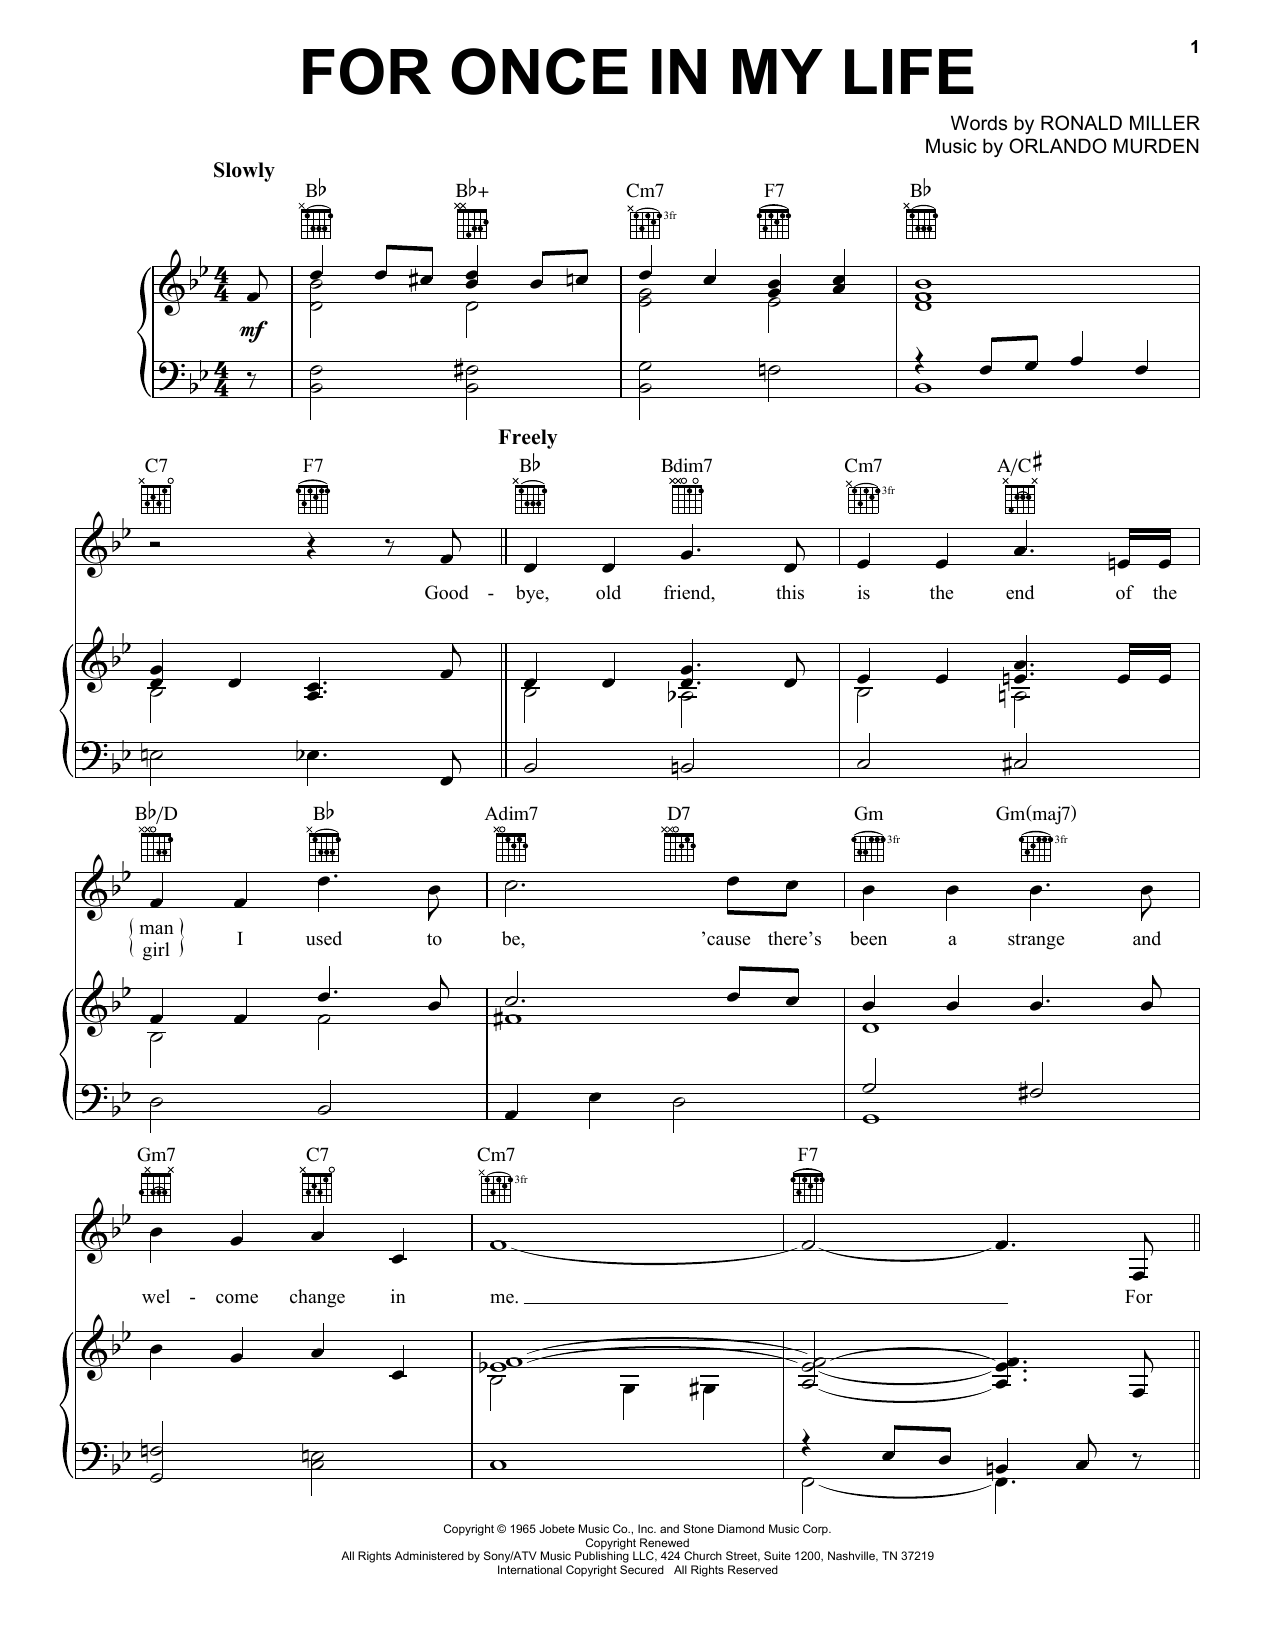 Stevie Wonder For Once In My Life sheet music notes printable PDF score